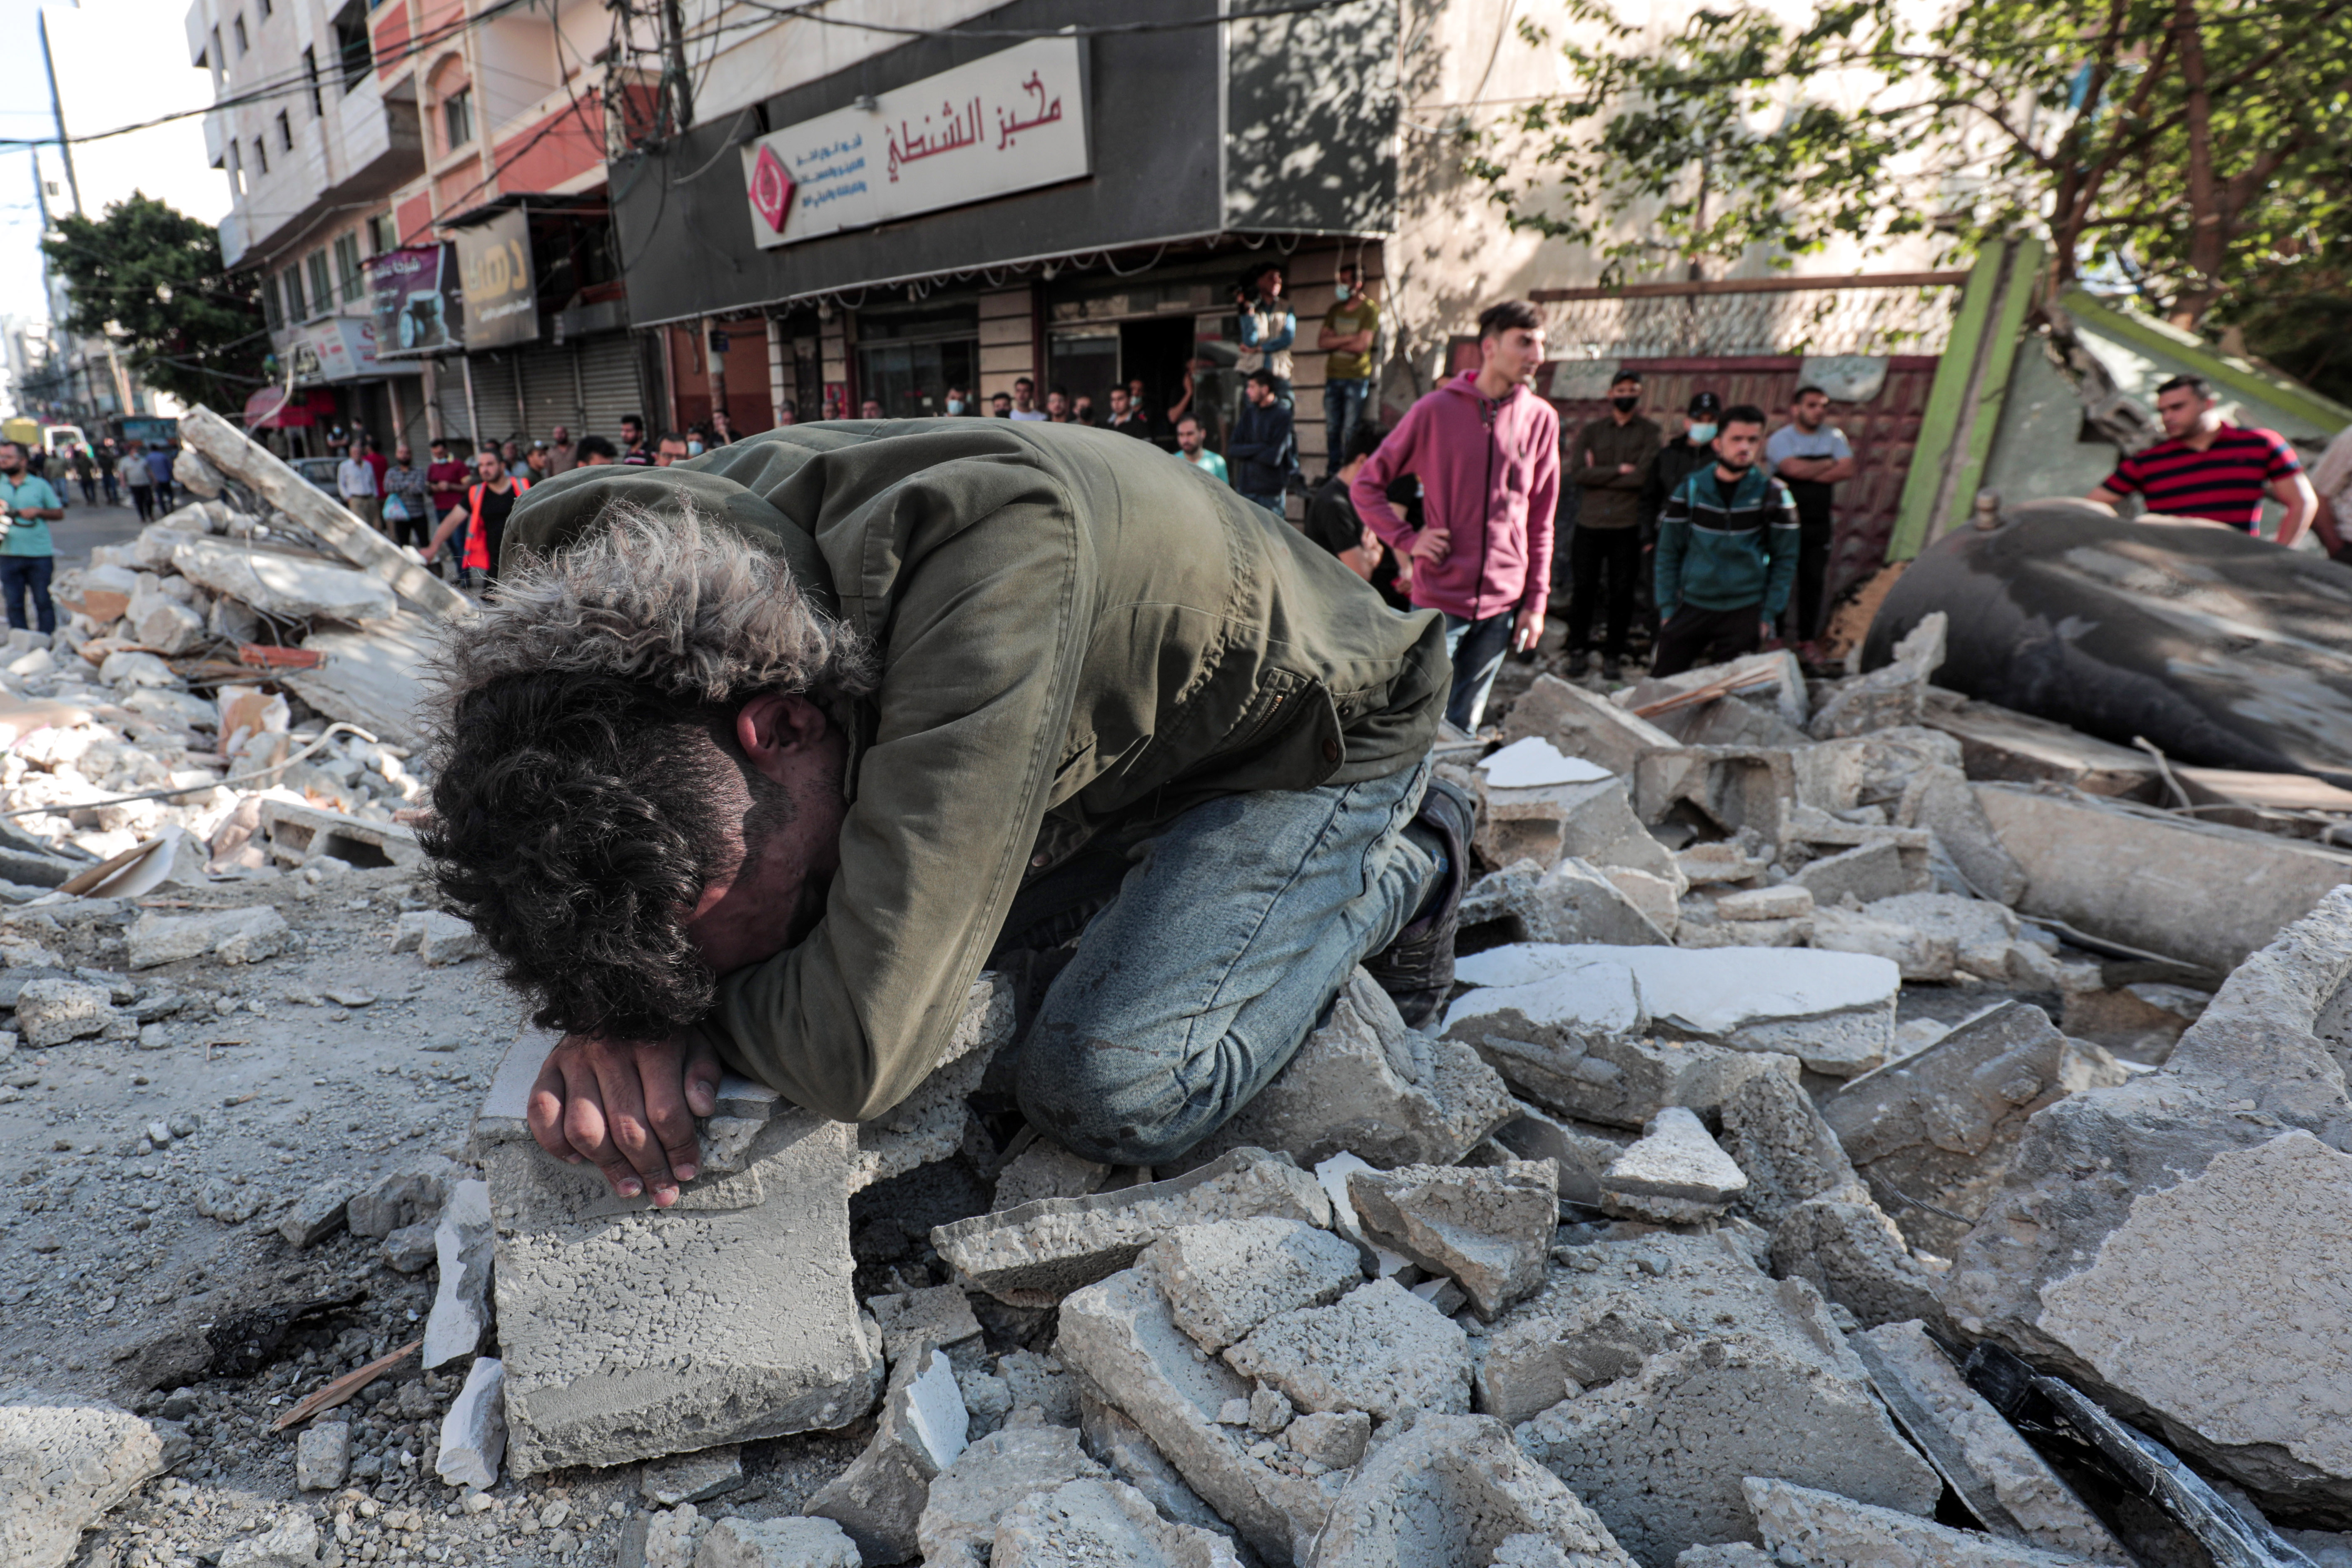 A Palestinian man weeps after victims of an Israeli air raid were removed from beneath the rubble of a destroyed home. Photo: Momen Faiz/NurPhoto via Getty Images